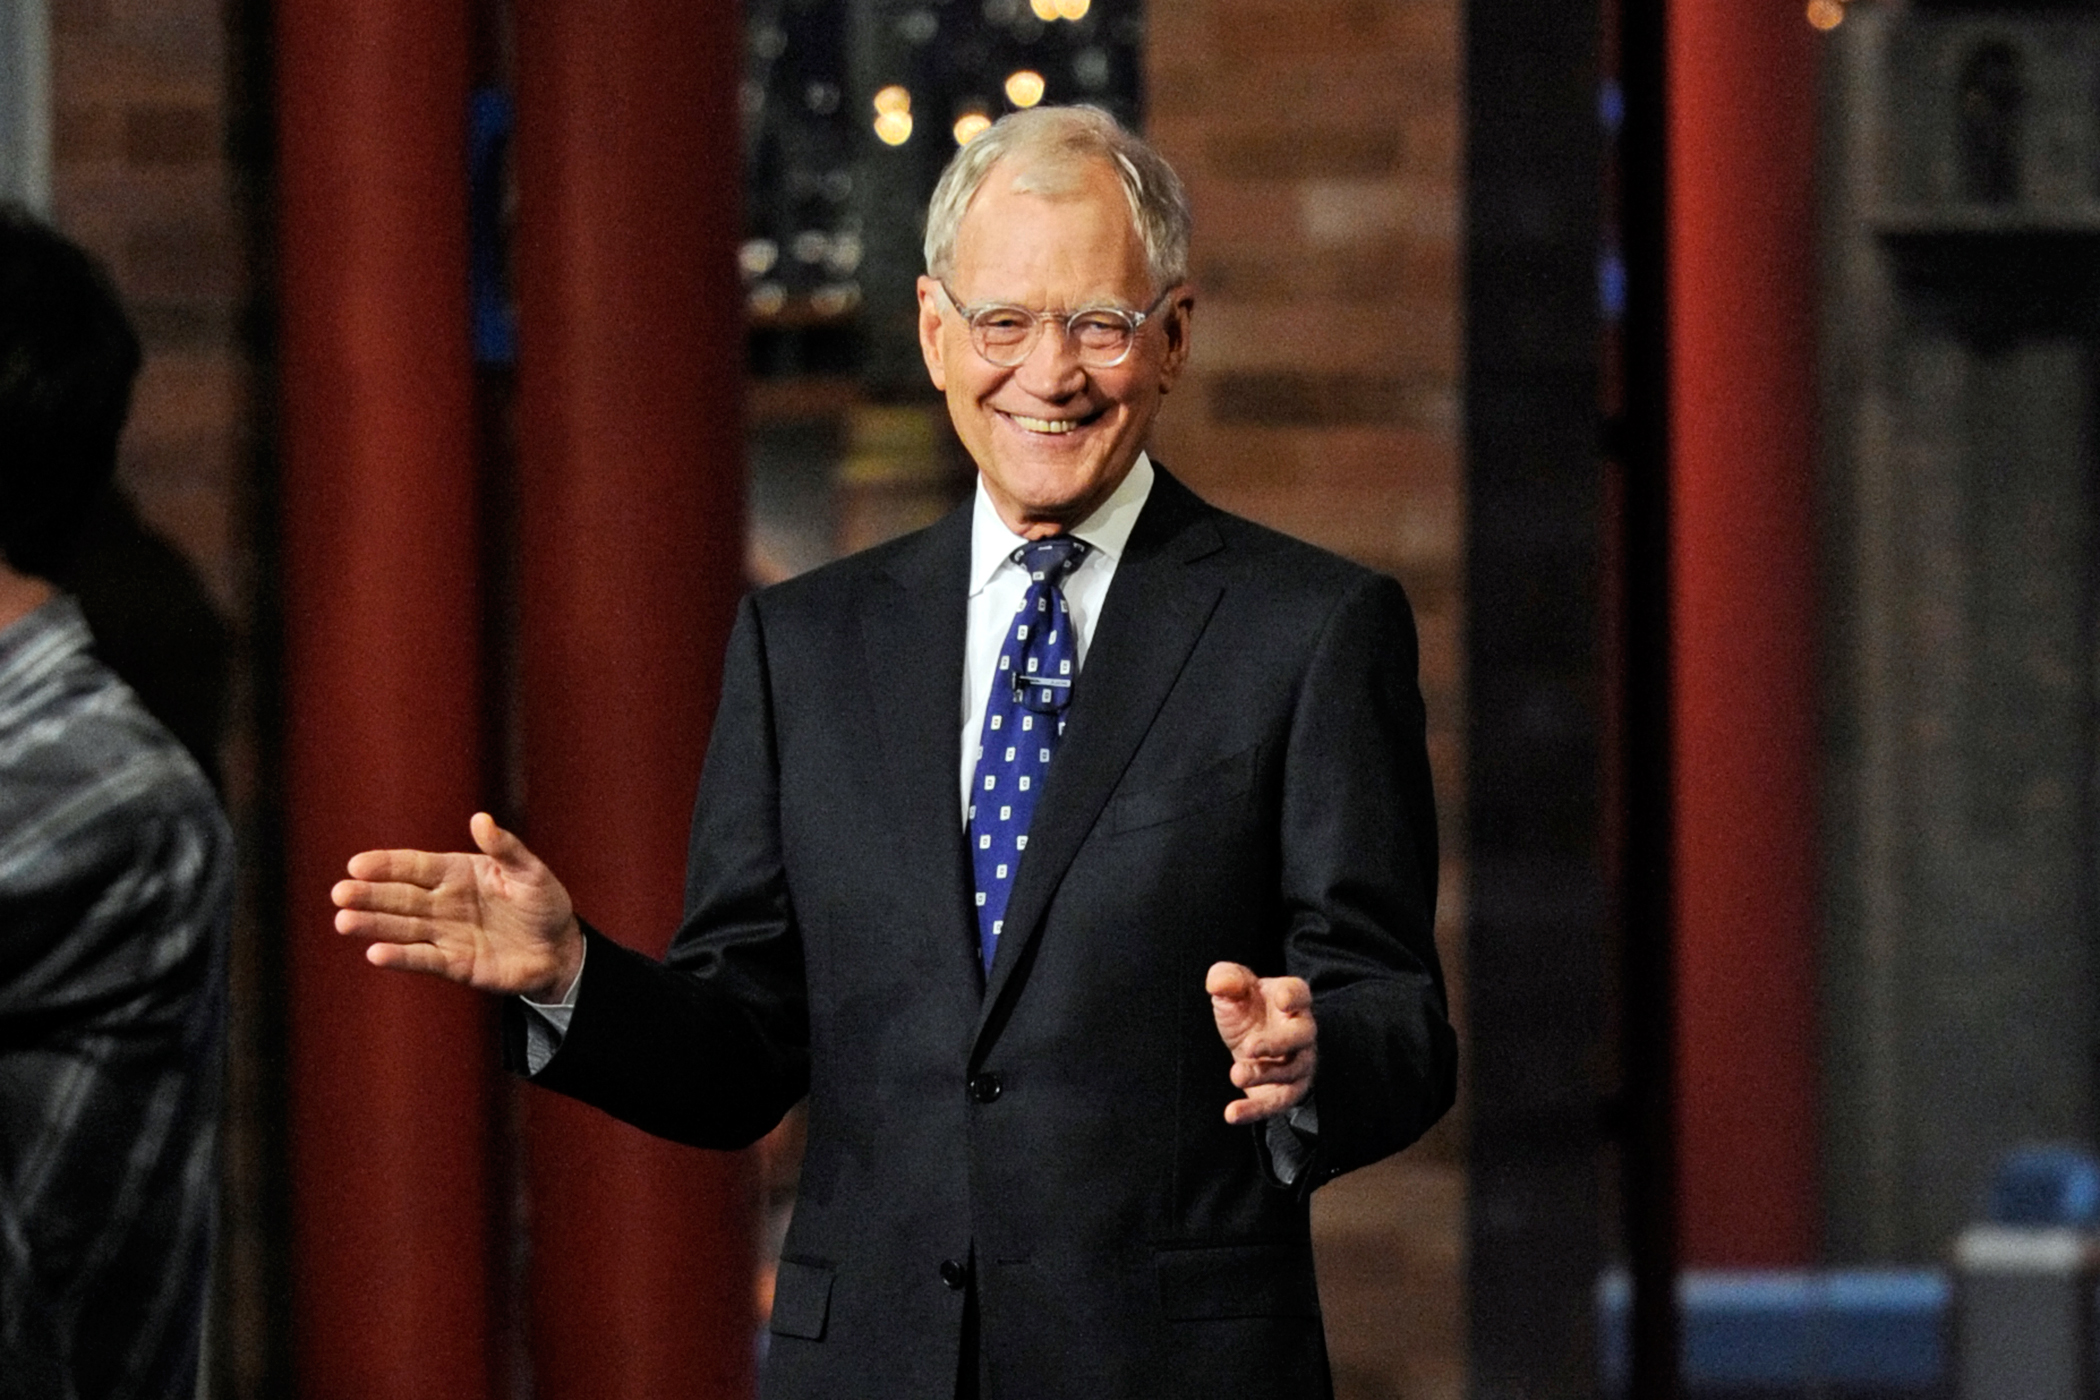 David Letterman hosts his final broadcast of the Late Show with David Letterman, Wednesday May 20, 2015 on the CBS Television Network.